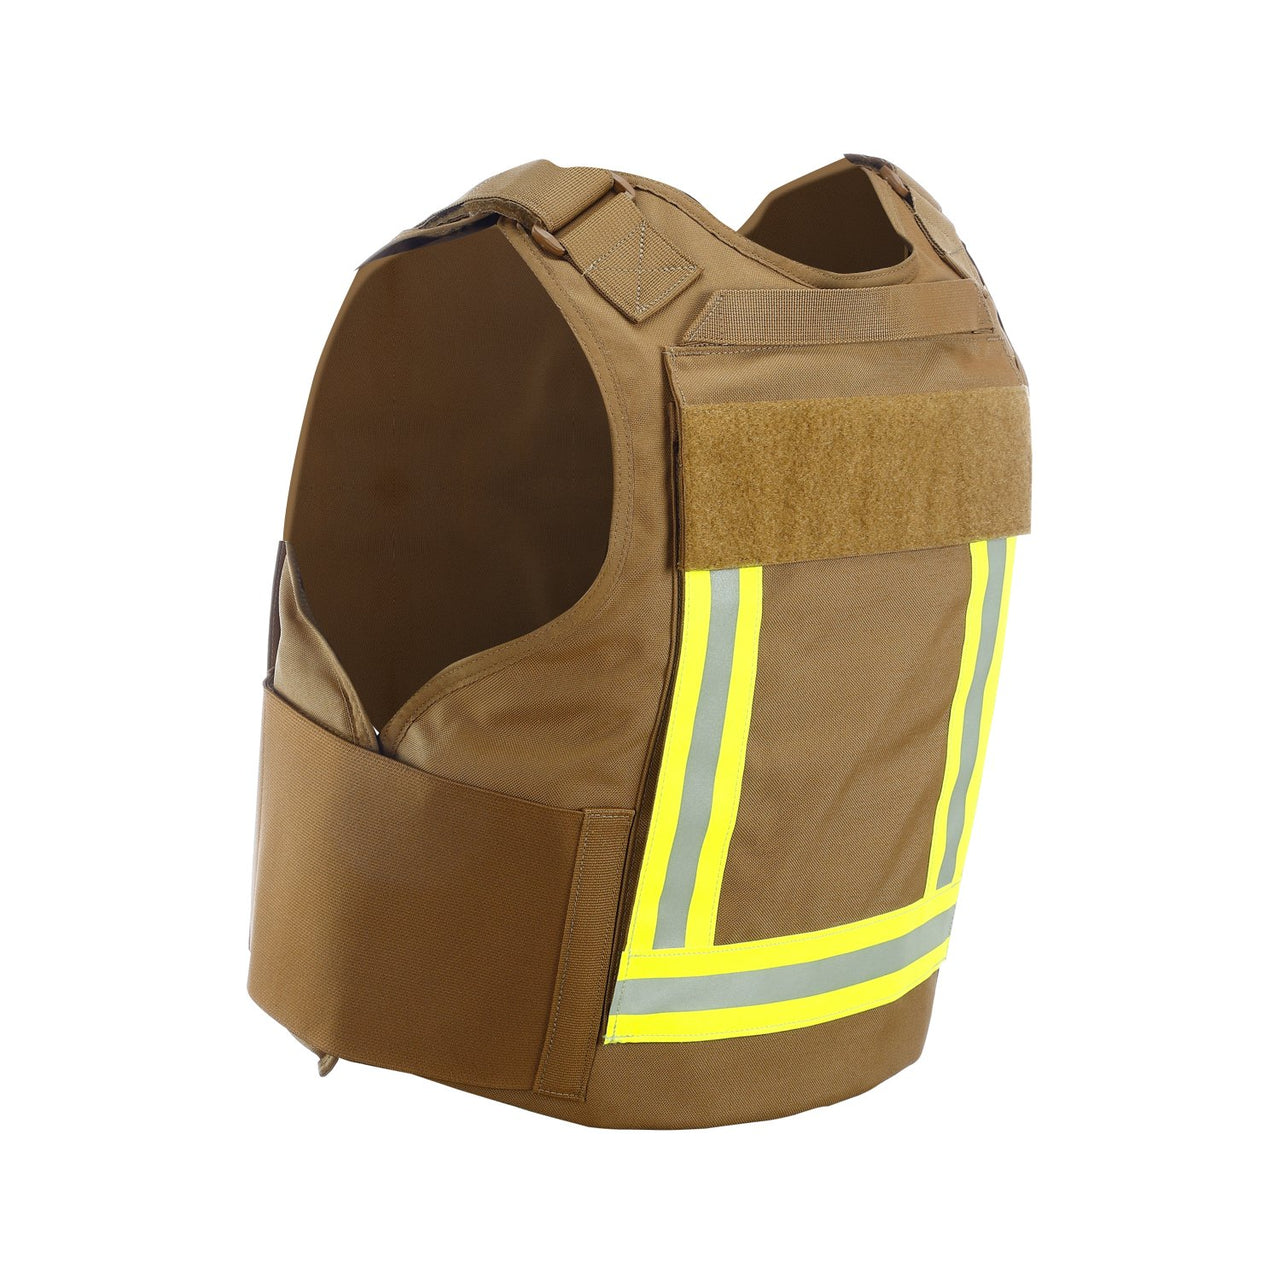 A Body Armor Direct Fireman Tactical Multi-Threat Vest with reflective strips on it.